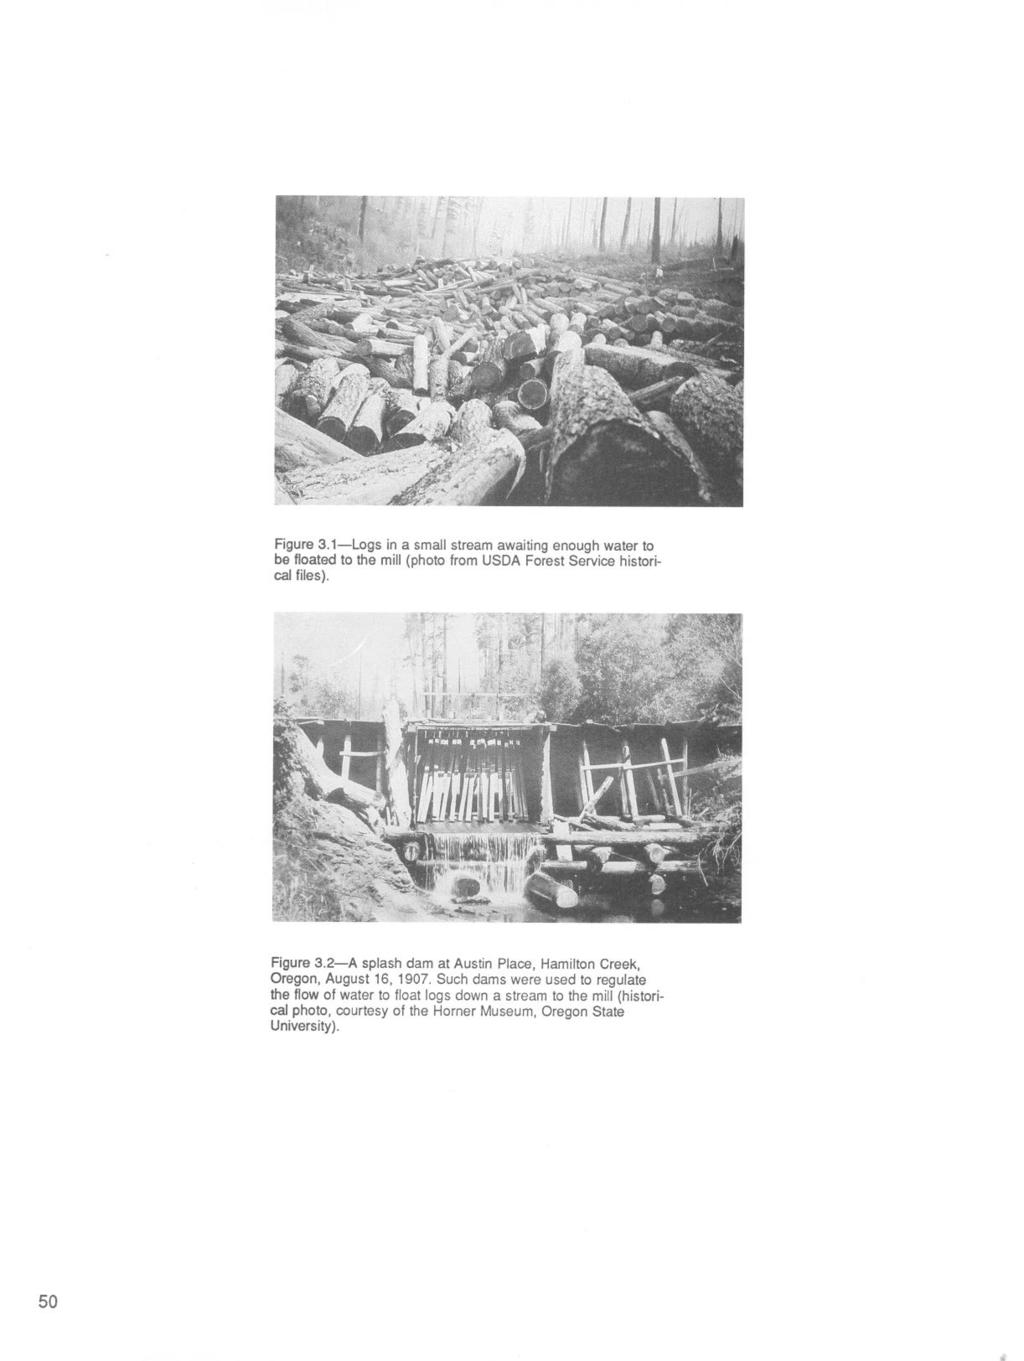 Figure 3.1-Logs in a small stream awaiting enough water to be floated to the mill (photo from USDA Forest Service historical files). Figure 3.